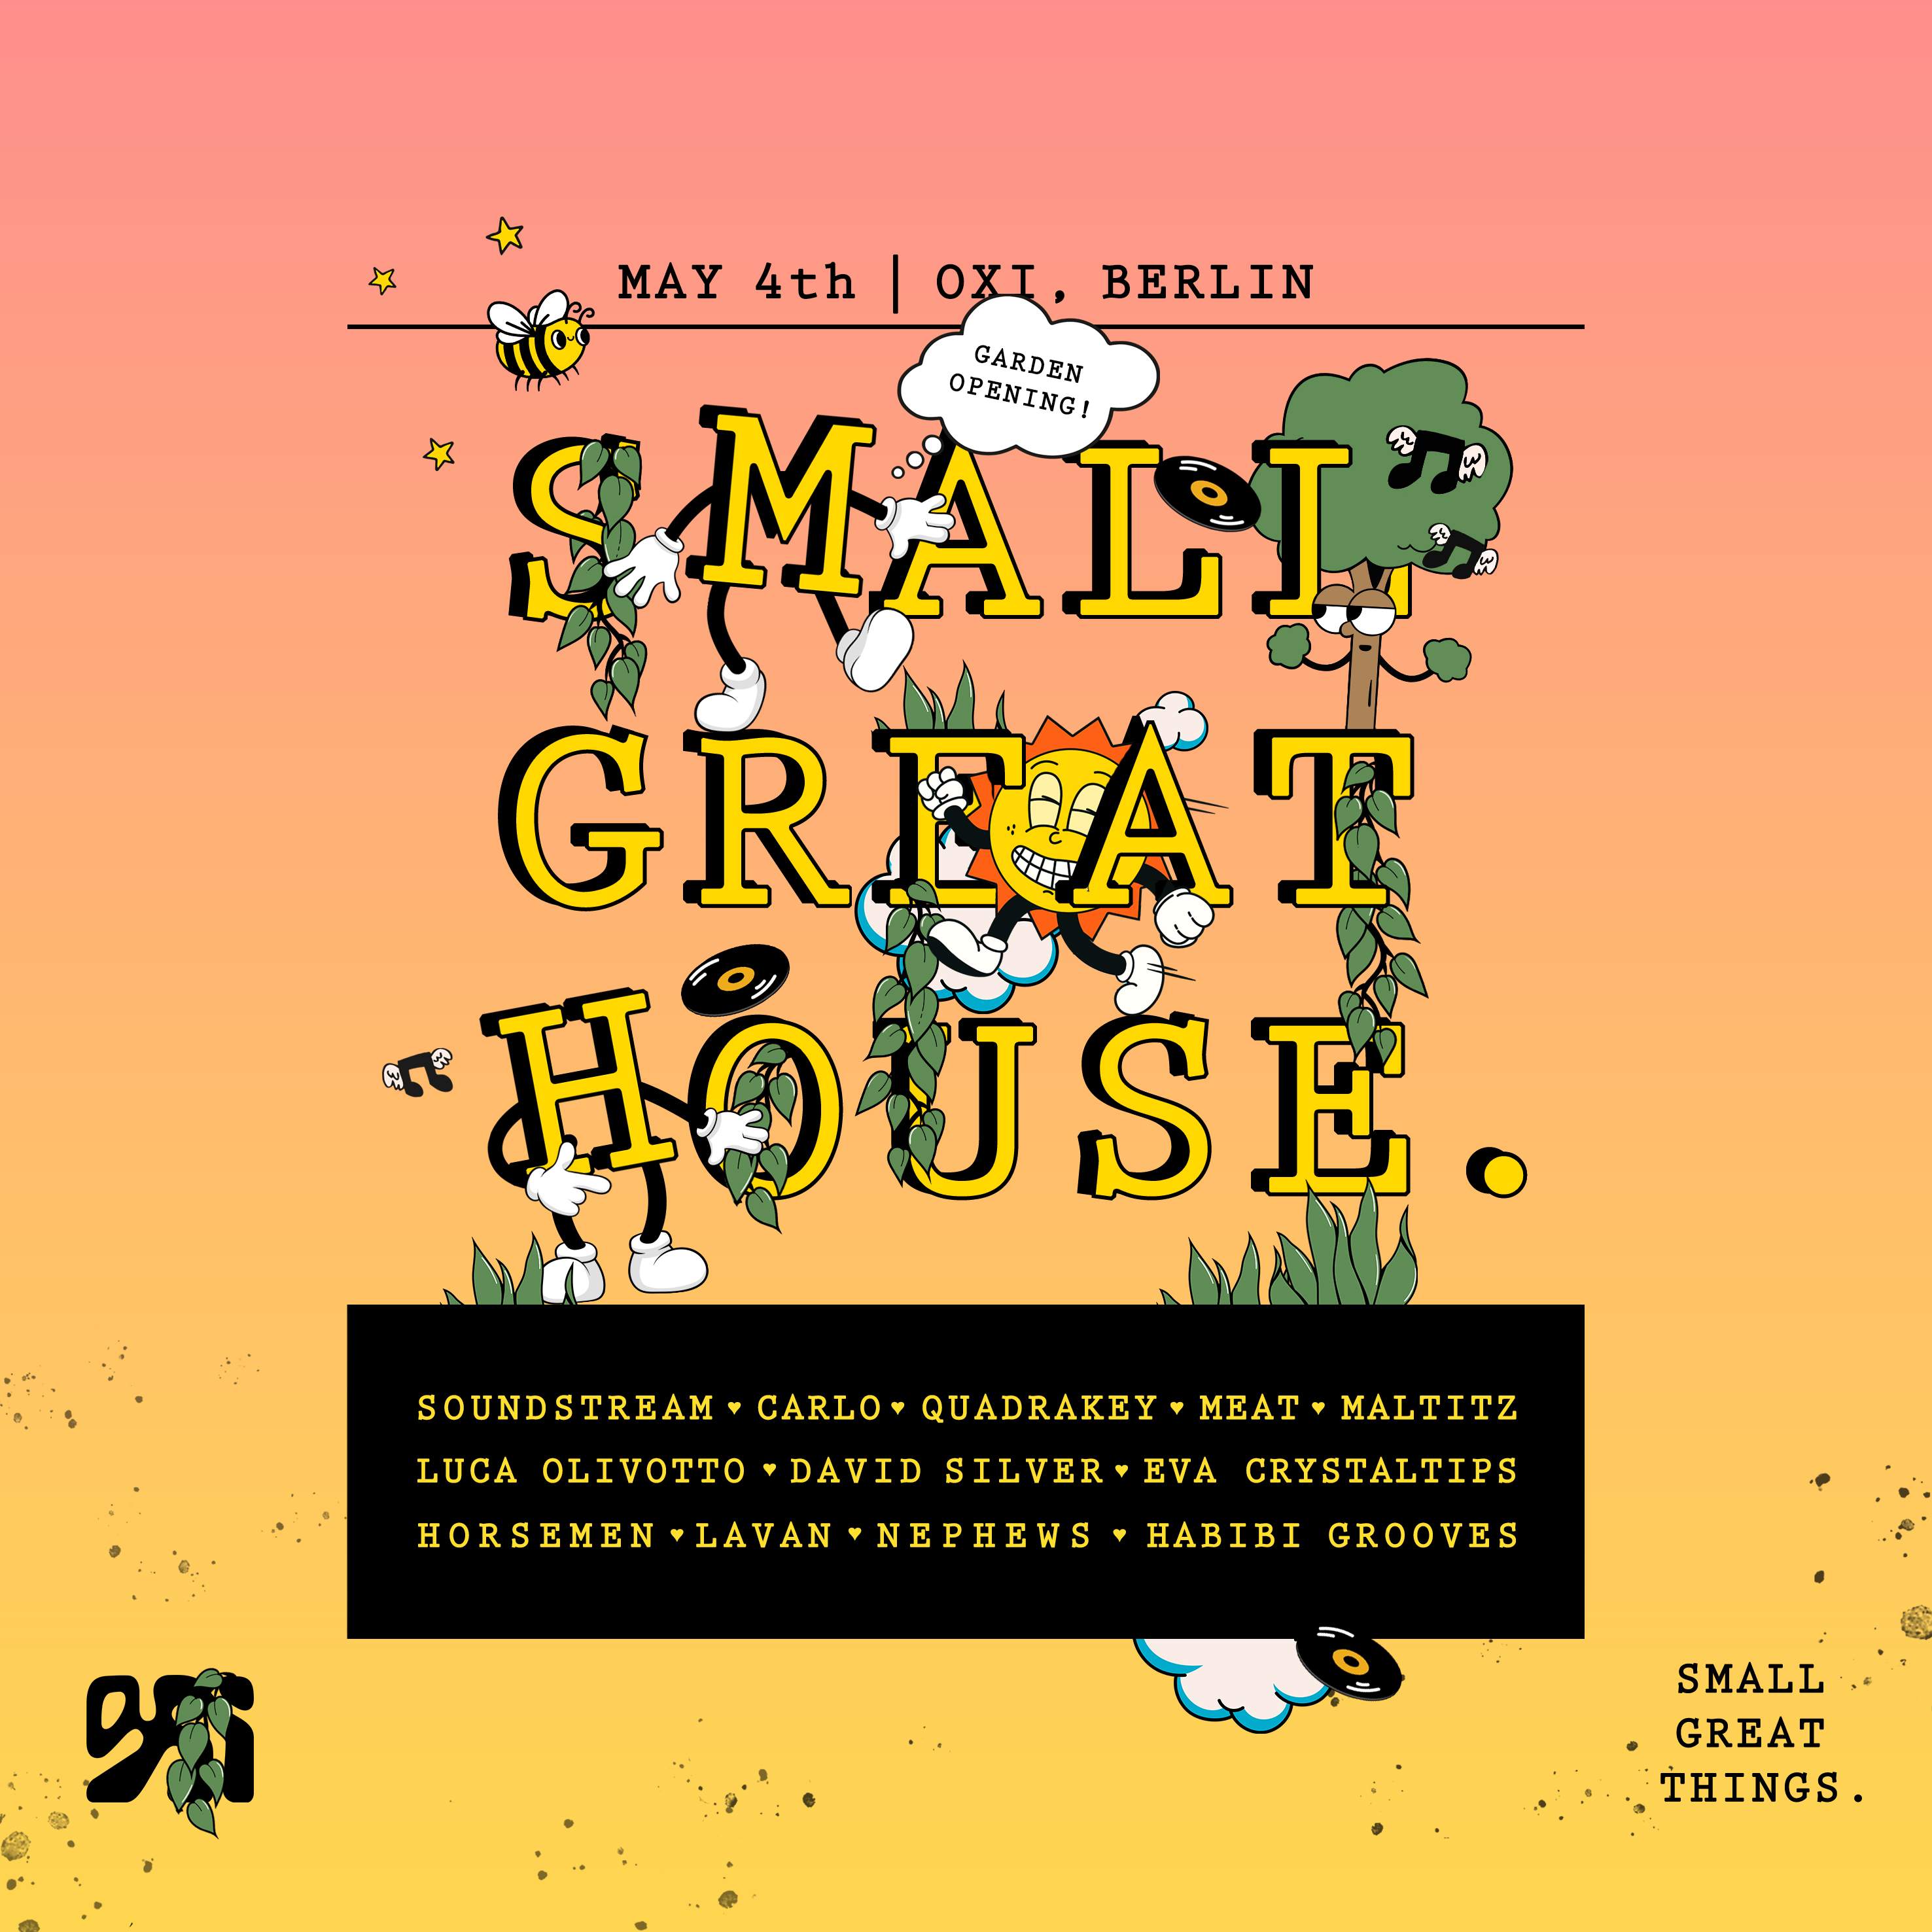 Small Great House 'Garden Opening' (Small Great Things.) OPENAIR + INDOOR - フライヤー裏